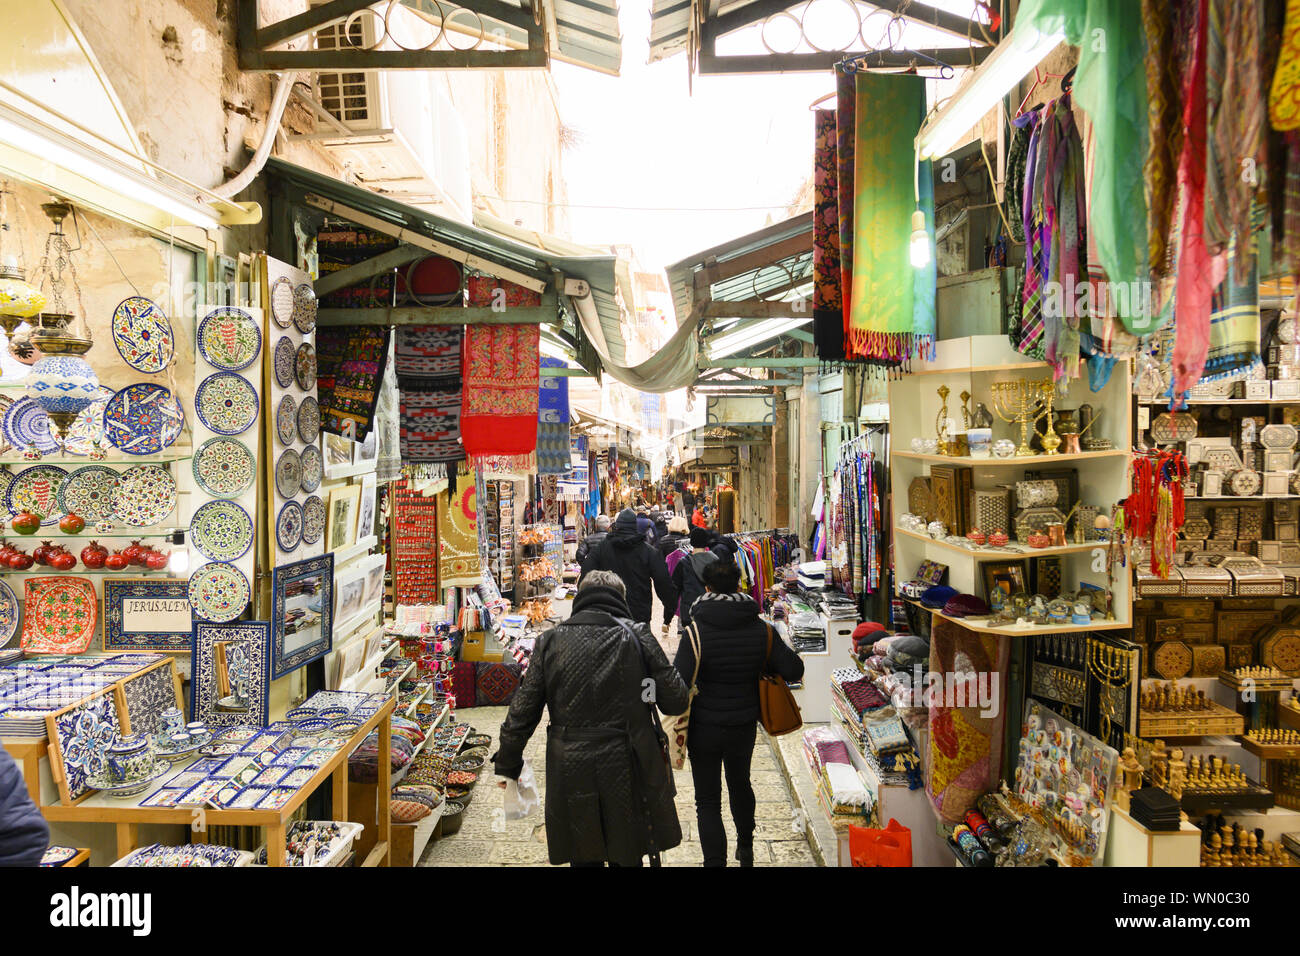 Locals and tourists at the Mahane Yehuda Market on a busy Friday. Mahane Yehuda Market often referred to as 'The Shuk is a marketplace in Jerusalem. Stock Photo